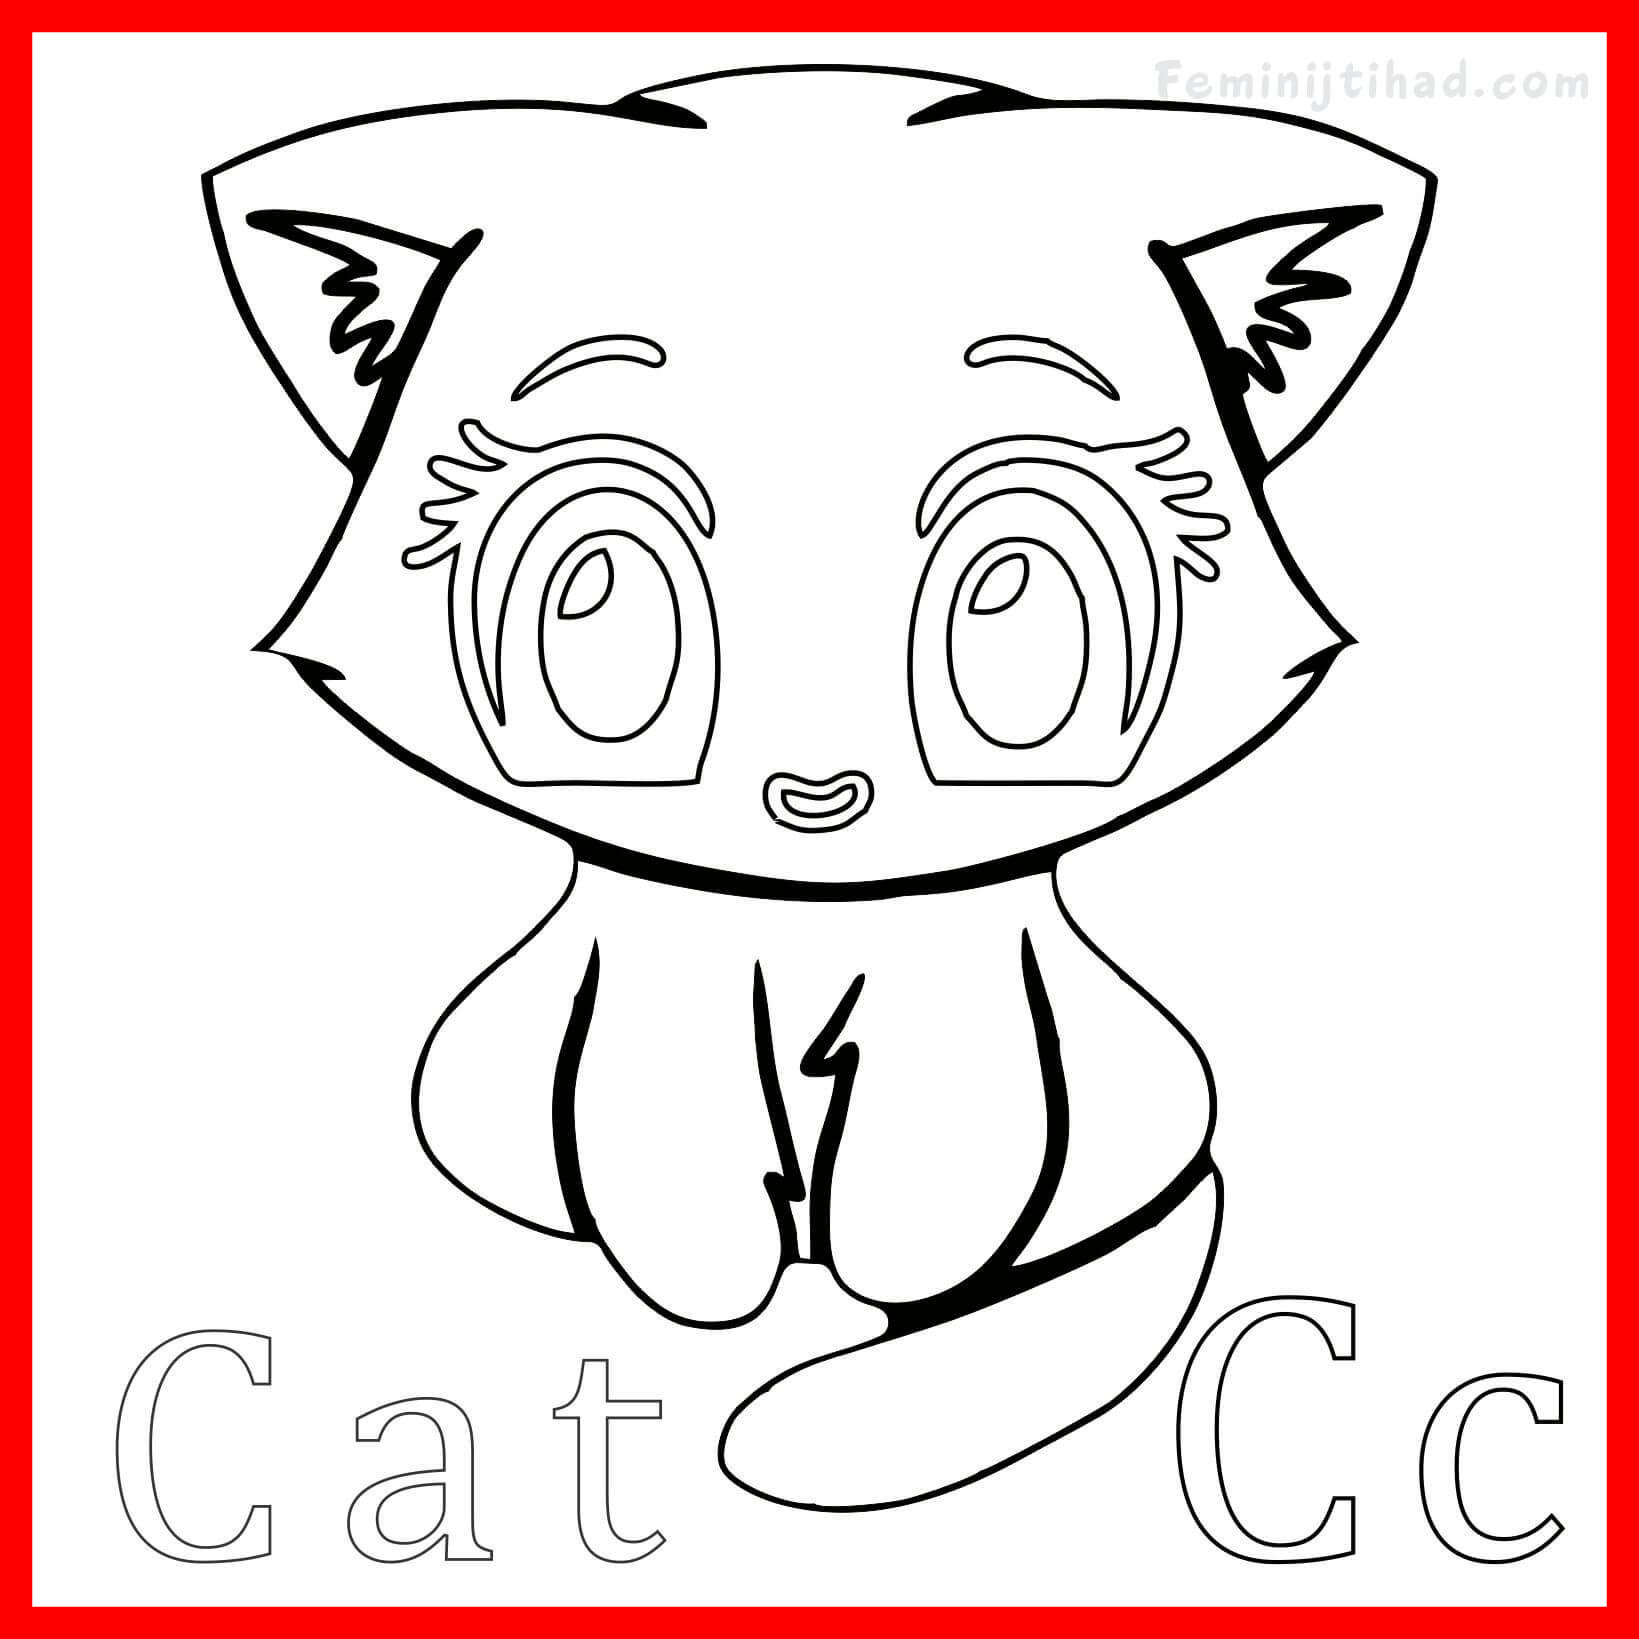 Cute Cat Coloring Pages at GetDrawings Free download